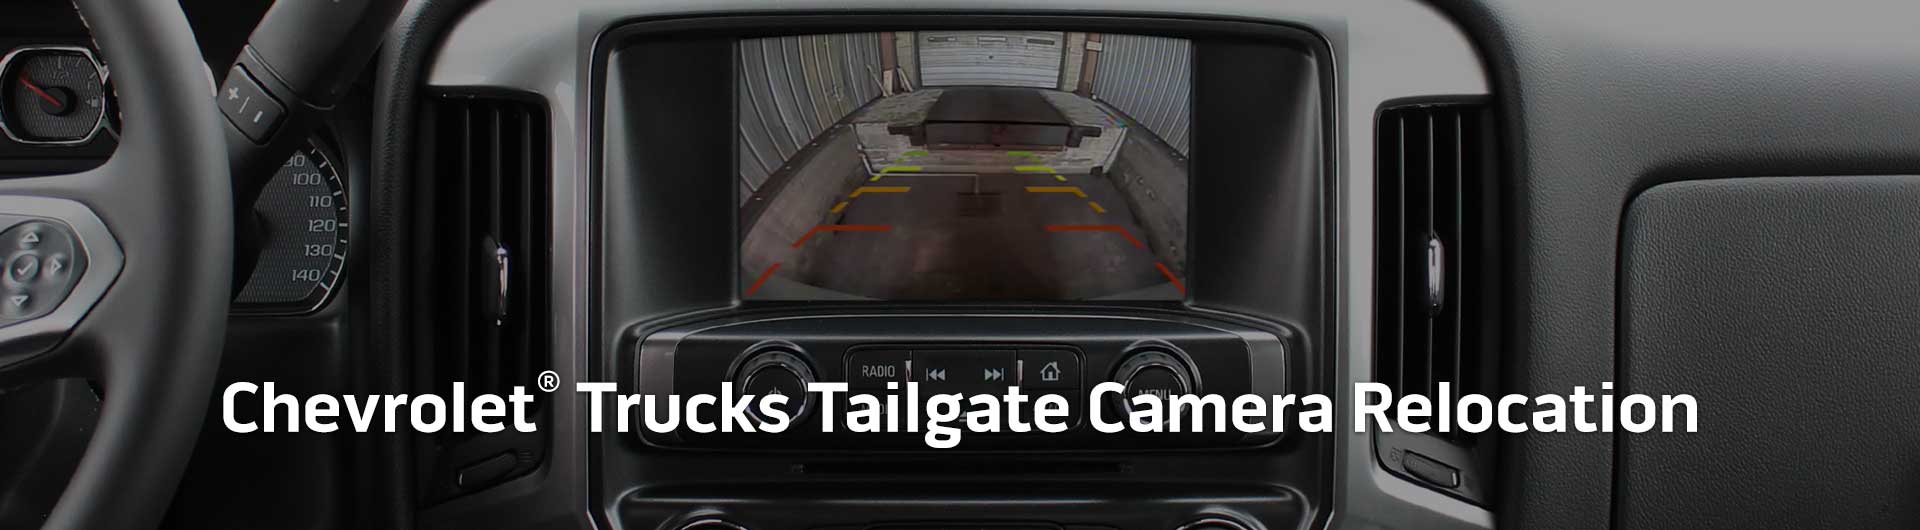 An image showing the in-dash monitor of a Chevrolet truck. The in-dash monitor shows that the truck is in reverse and is displaying both the backup camera and video from the cameras on the front and side of the truck. The image has text that reads Chevrolet Trucks Tailgate Camera Relocation.